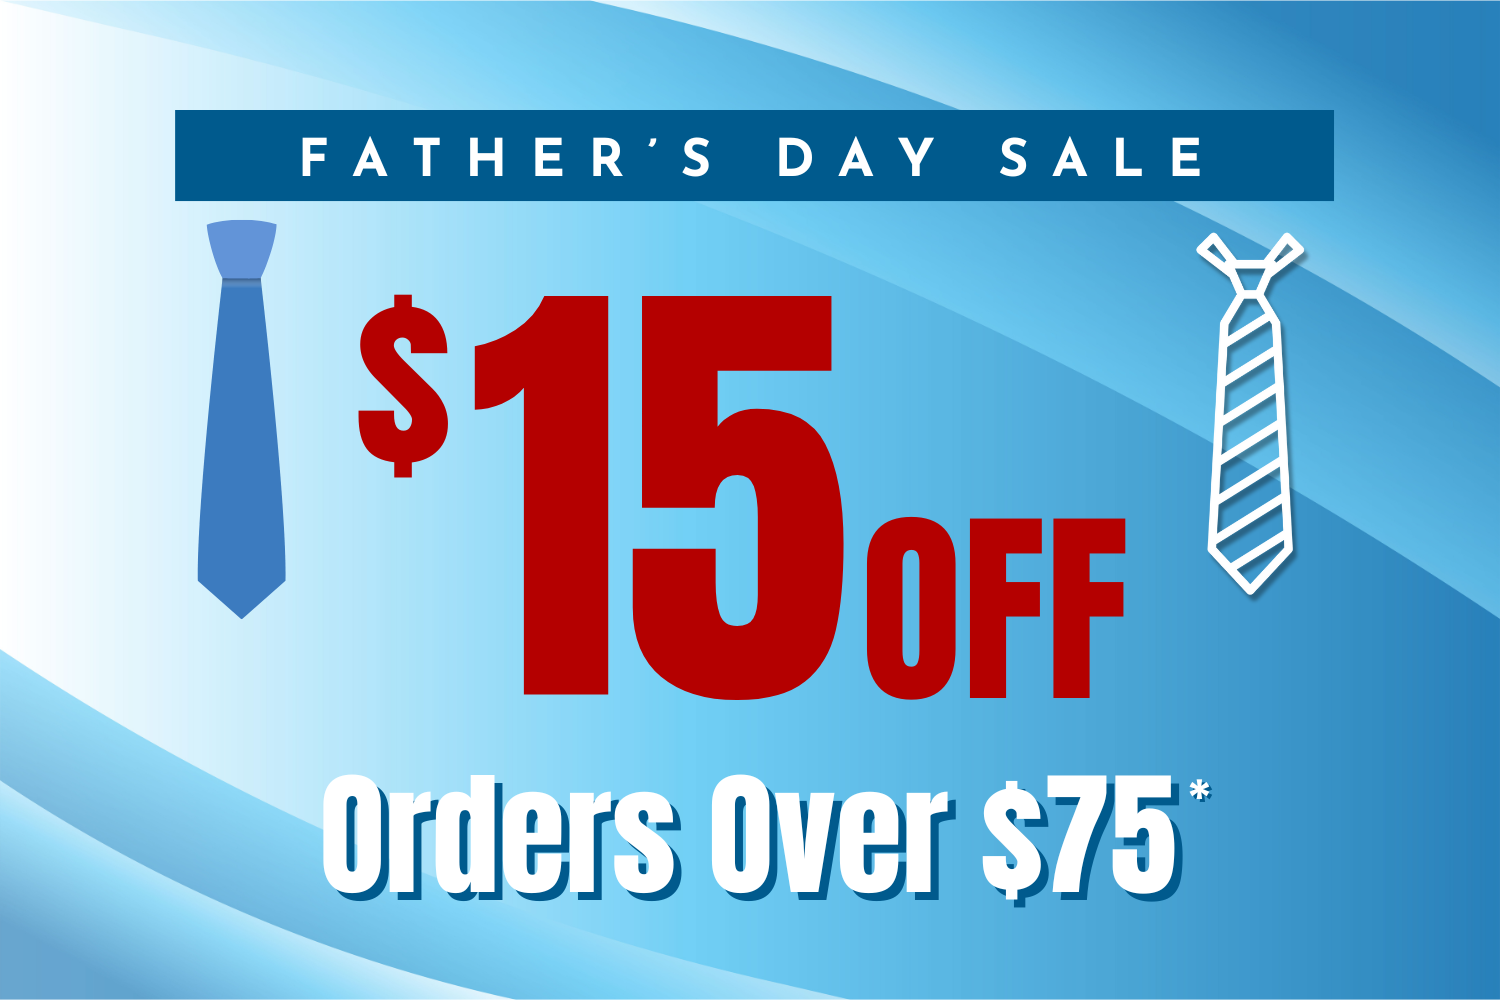 Father's Day sale